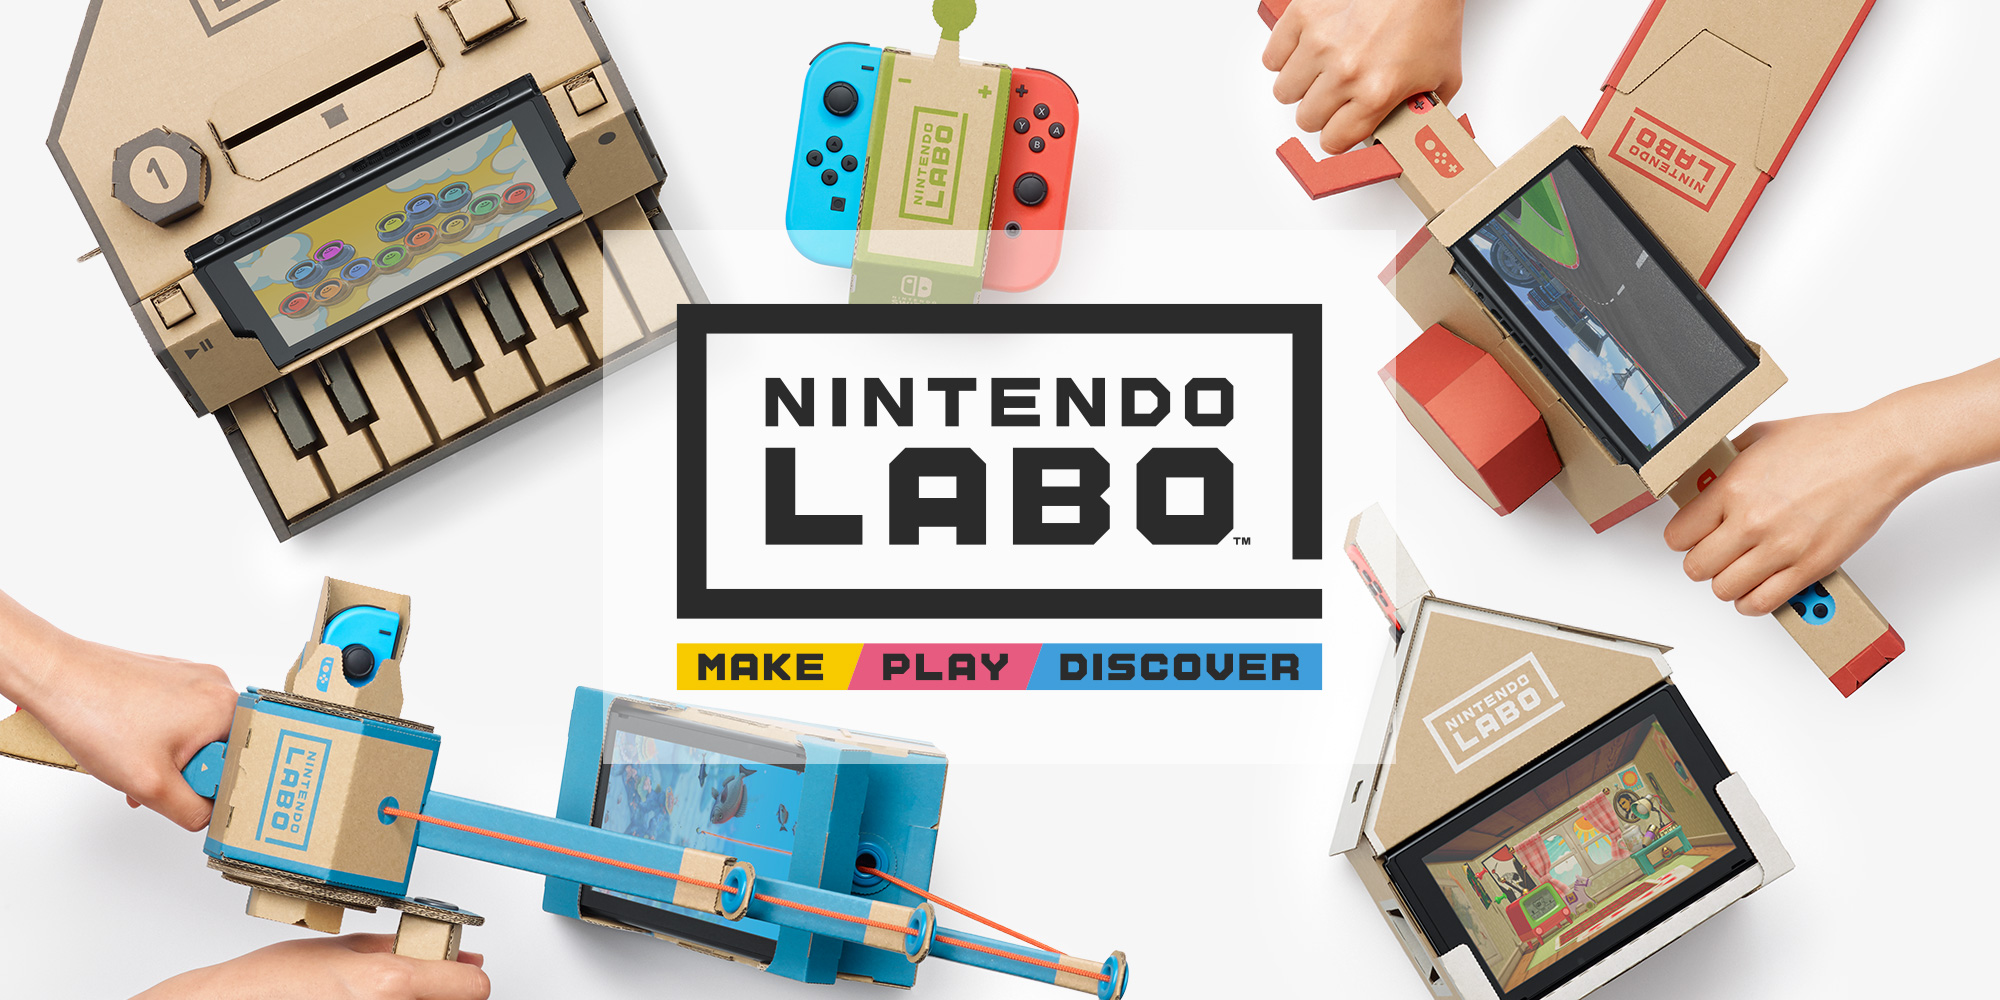 title campaign Th Nintendo Labo combines fun interactive make, play and discover experiences  with Nintendo Switch | News | Nintendo